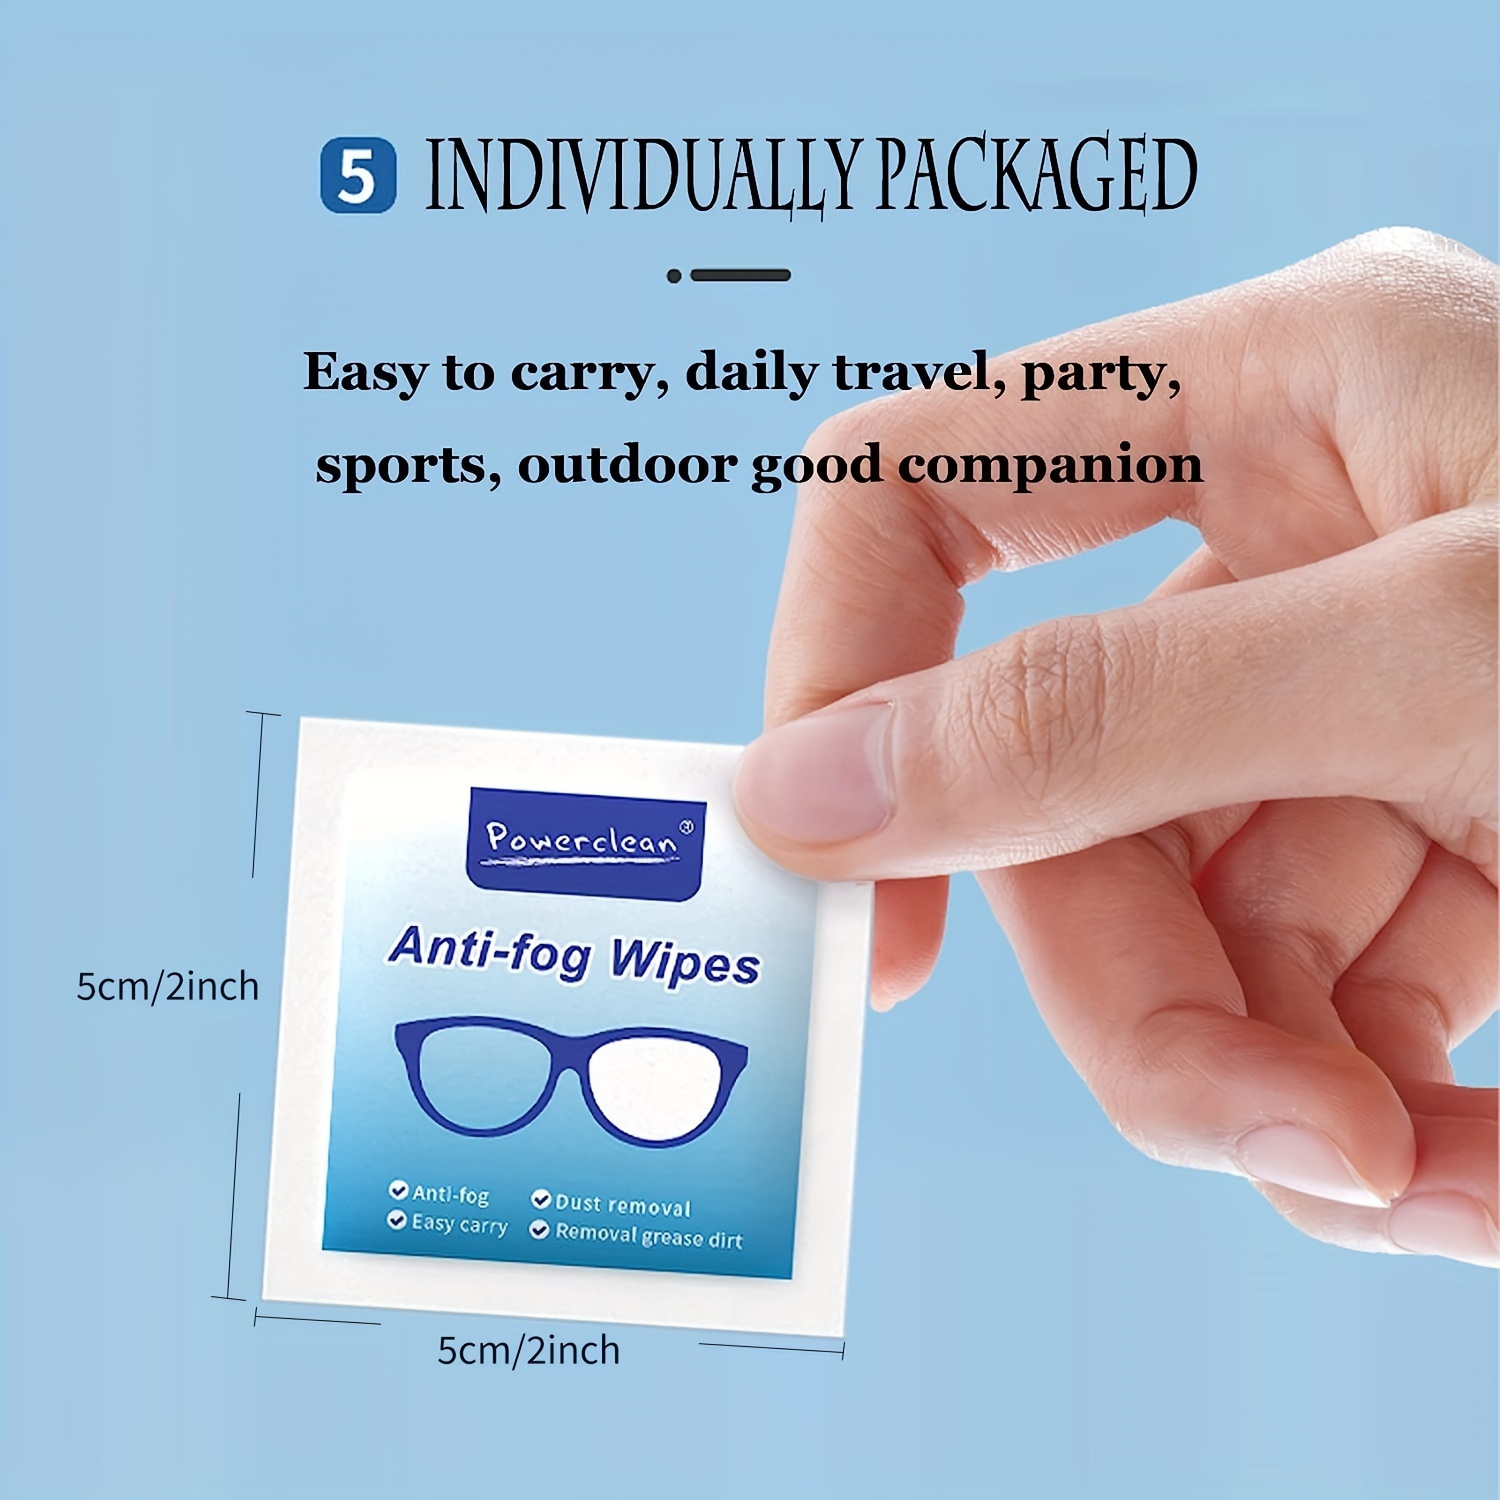 100pcs/Box Eyeglass Cleaner Lens Wipes, Eye Glasses Cleaner Wipes,  Pre-Moistened Individually Wrapped Wipes, Non-Scratching,  Non-Streaking,Anti-Fog